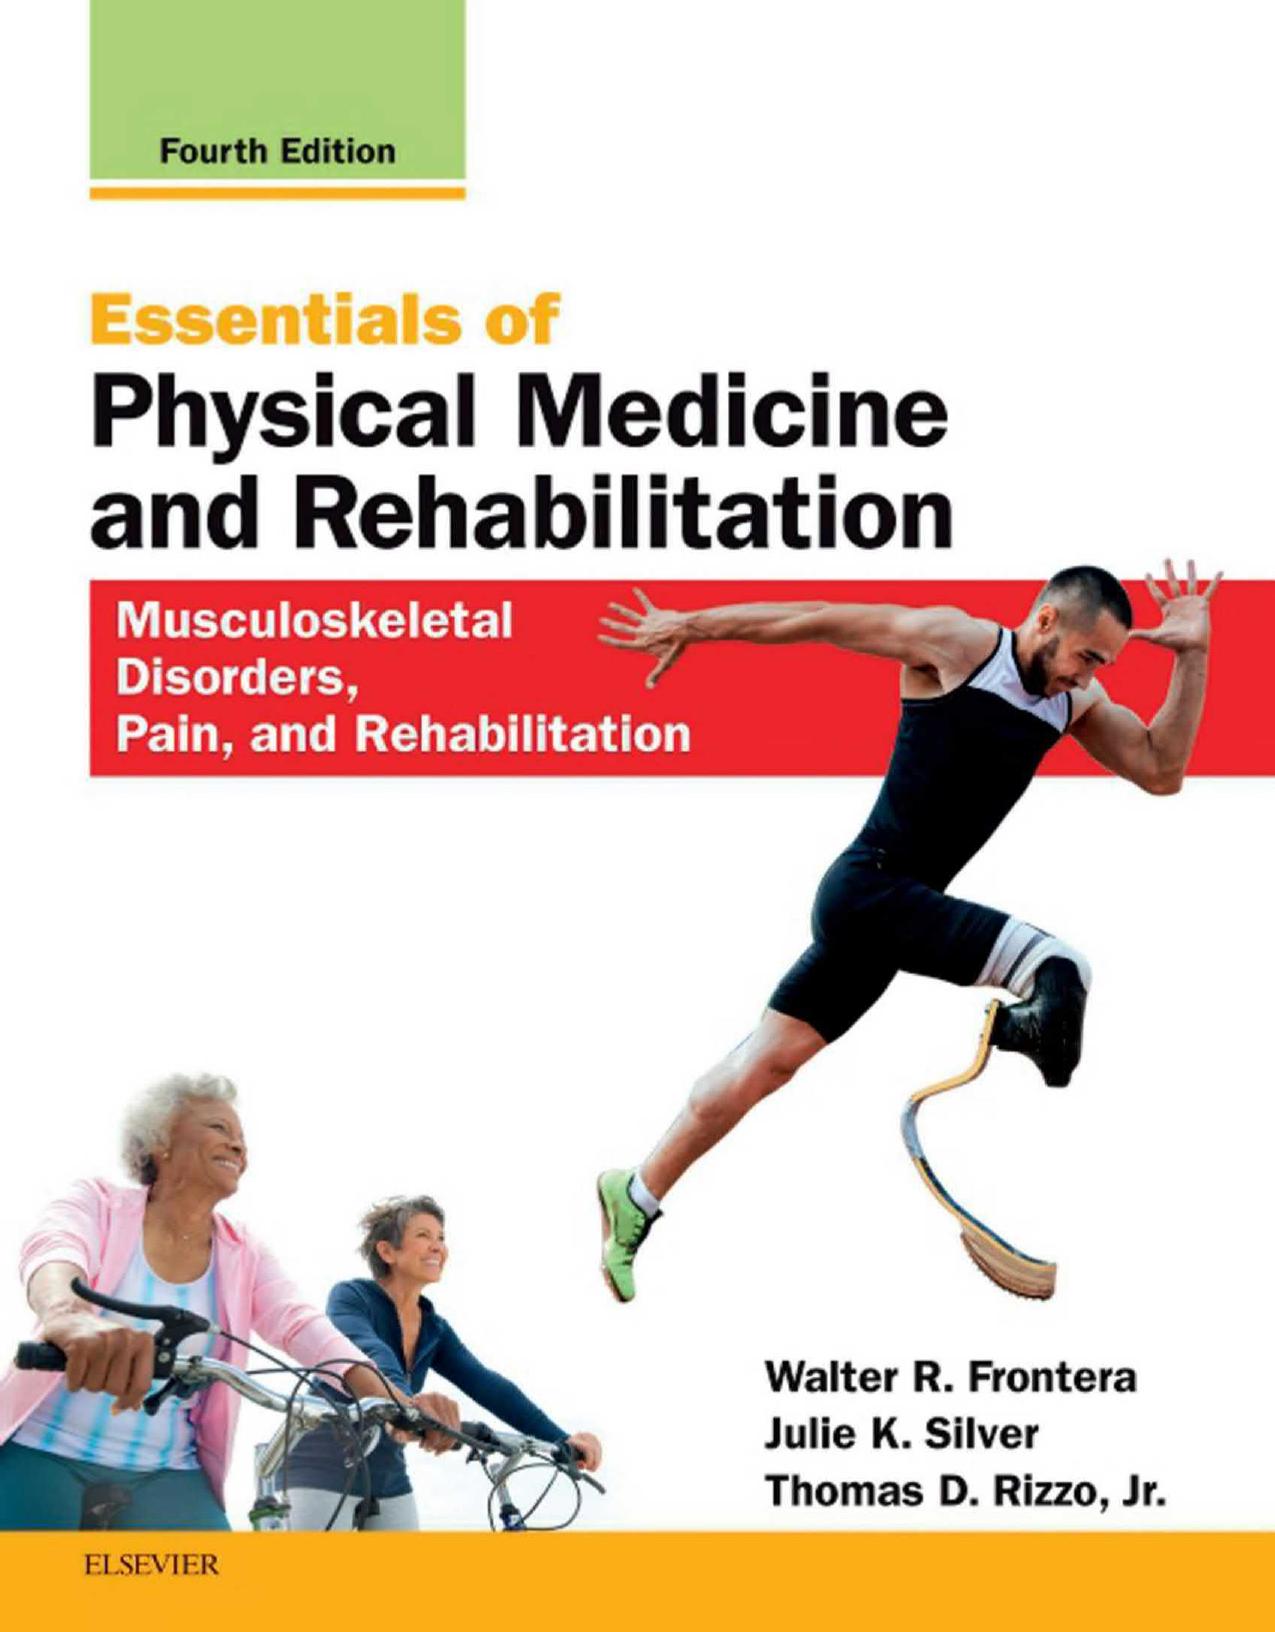 Essentials of Physical Medicine and Rehabilitation_ Musculoskeletal Disorders, Pain, and Rehabilitation.jpg